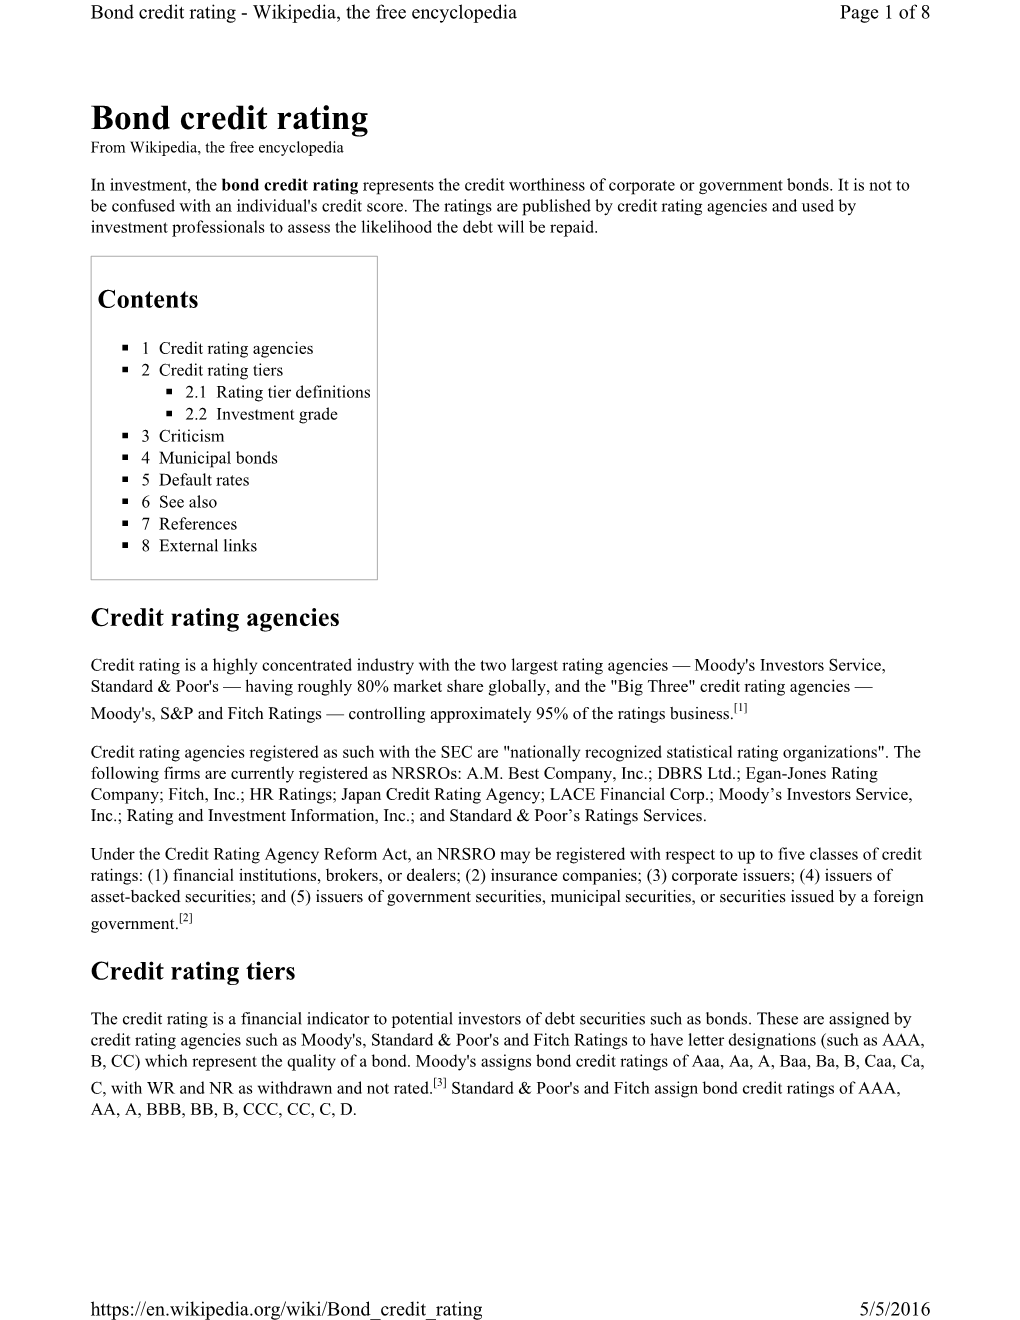 Bond Credit Rating - Wikipedia, the Free Encyclopedia Page 1 of 8